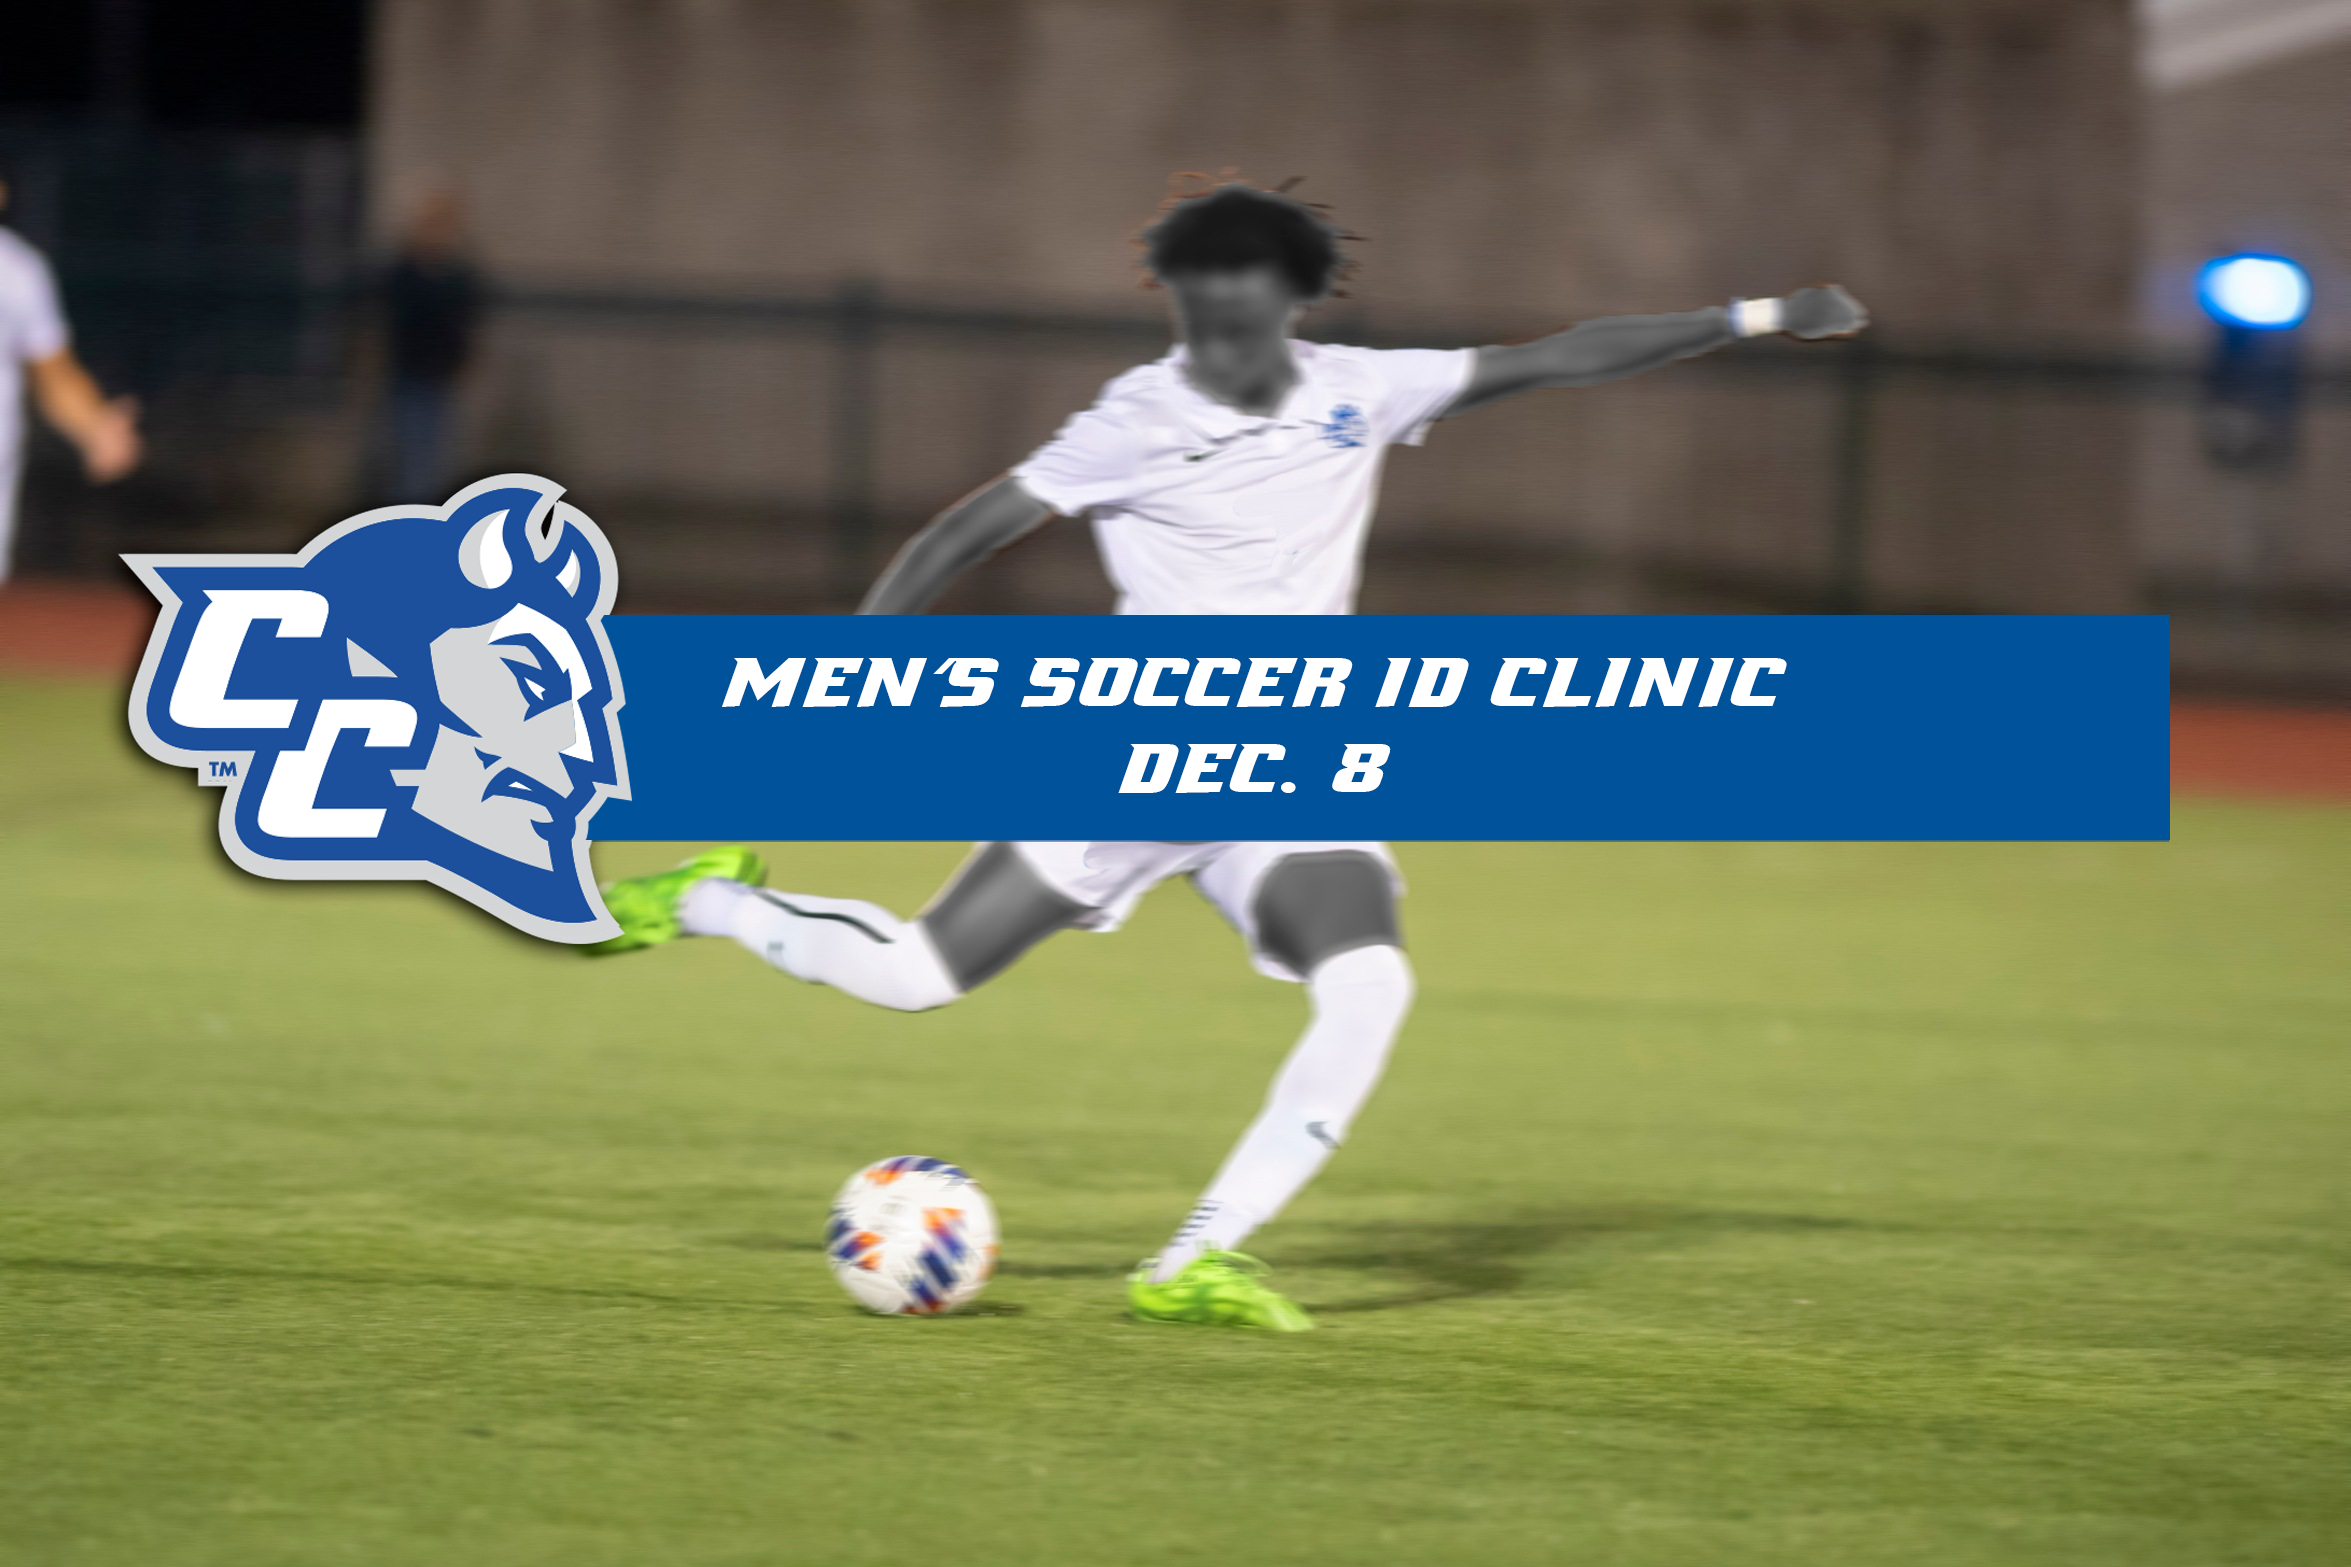 Men's Soccer One-Day ID Clinic Will Be on Dec. 8